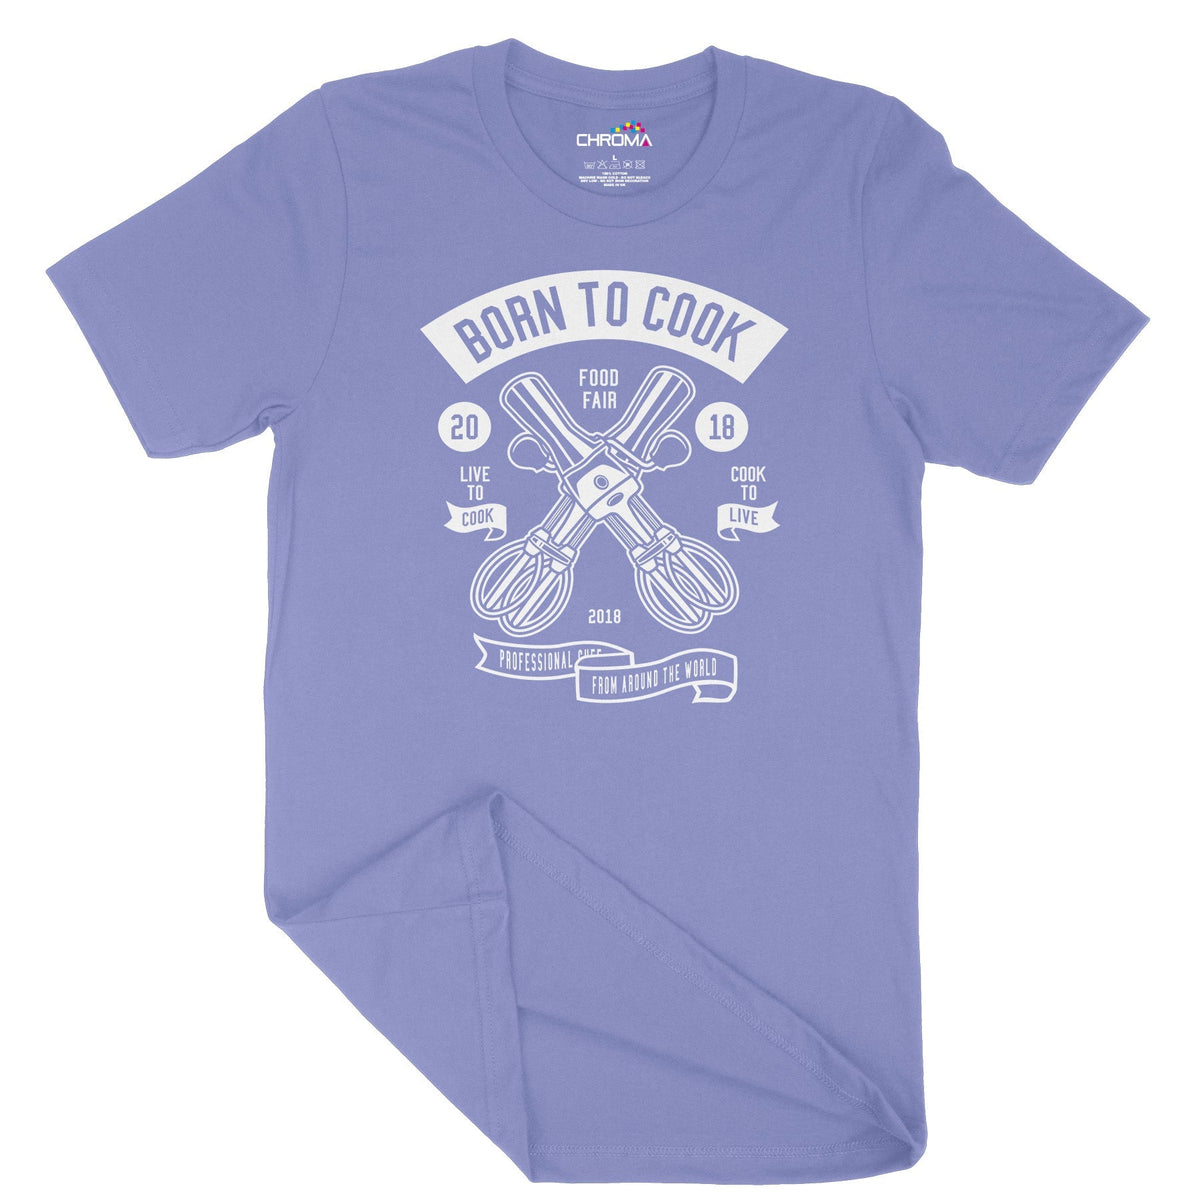 Born To Cook | Vintage Adult T-Shirt | Classic Vintage Clothing Chroma Clothing